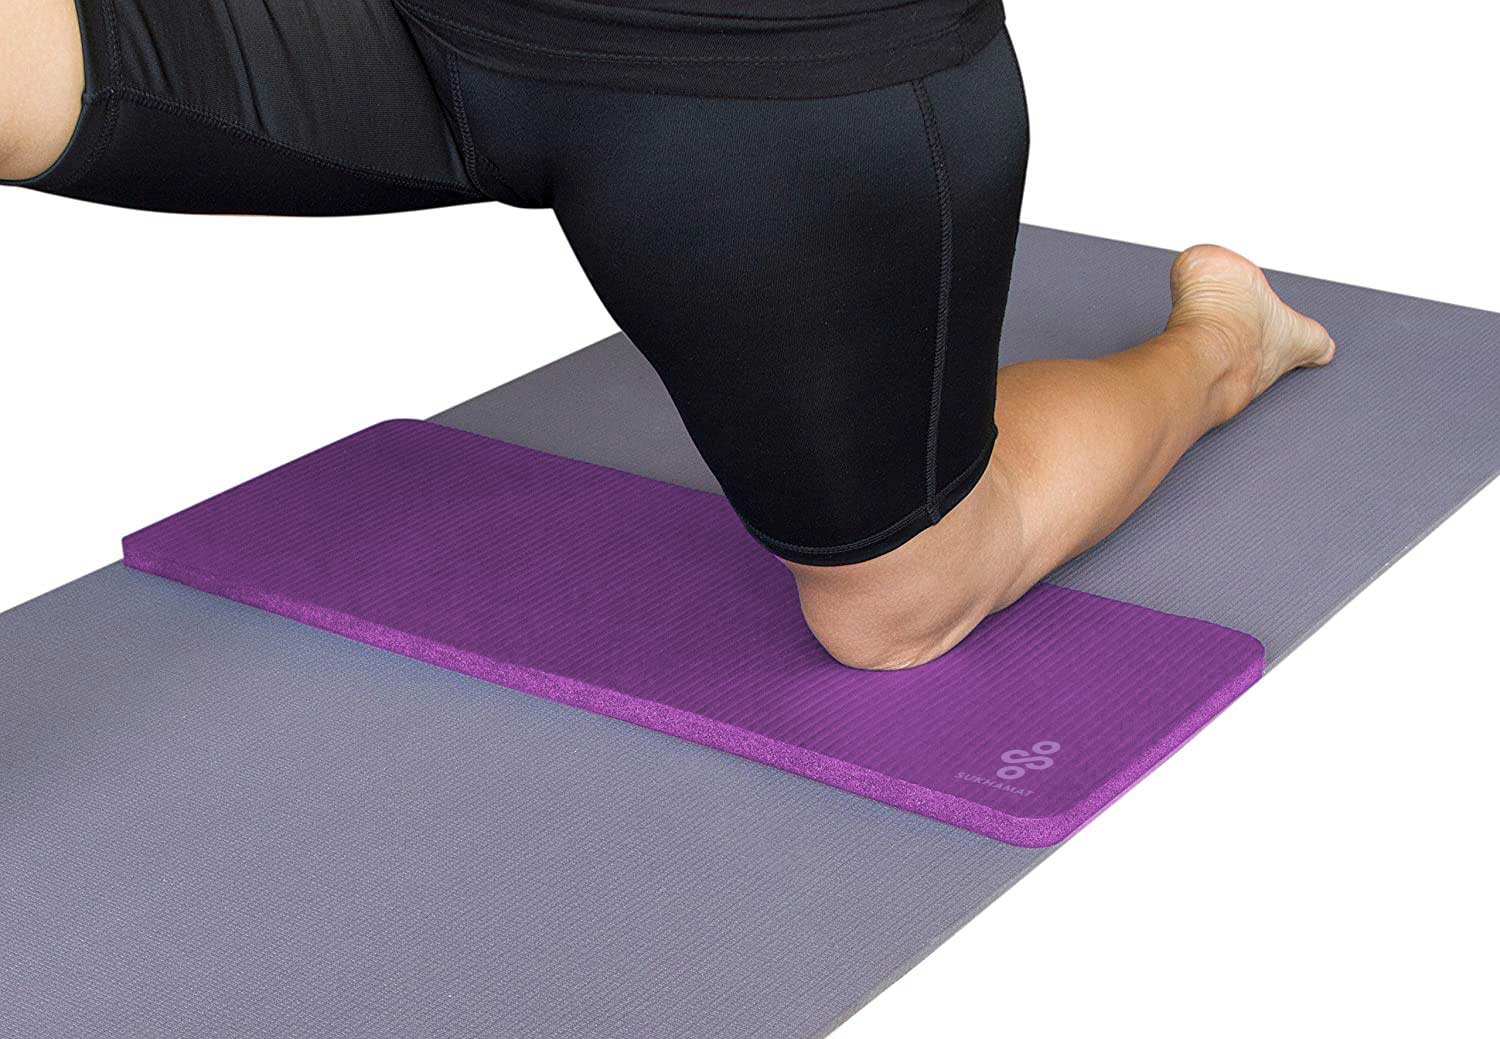  Firm Support Yoga Knee Pad by SukhaMat - Comfort Cushioning 1  Thick TPE, Ideal for Knees/Elbows/Wrists, Pain Relief, Durable Non-Slip Mat  for Floor Exercises (Black) : Sports & Outdoors